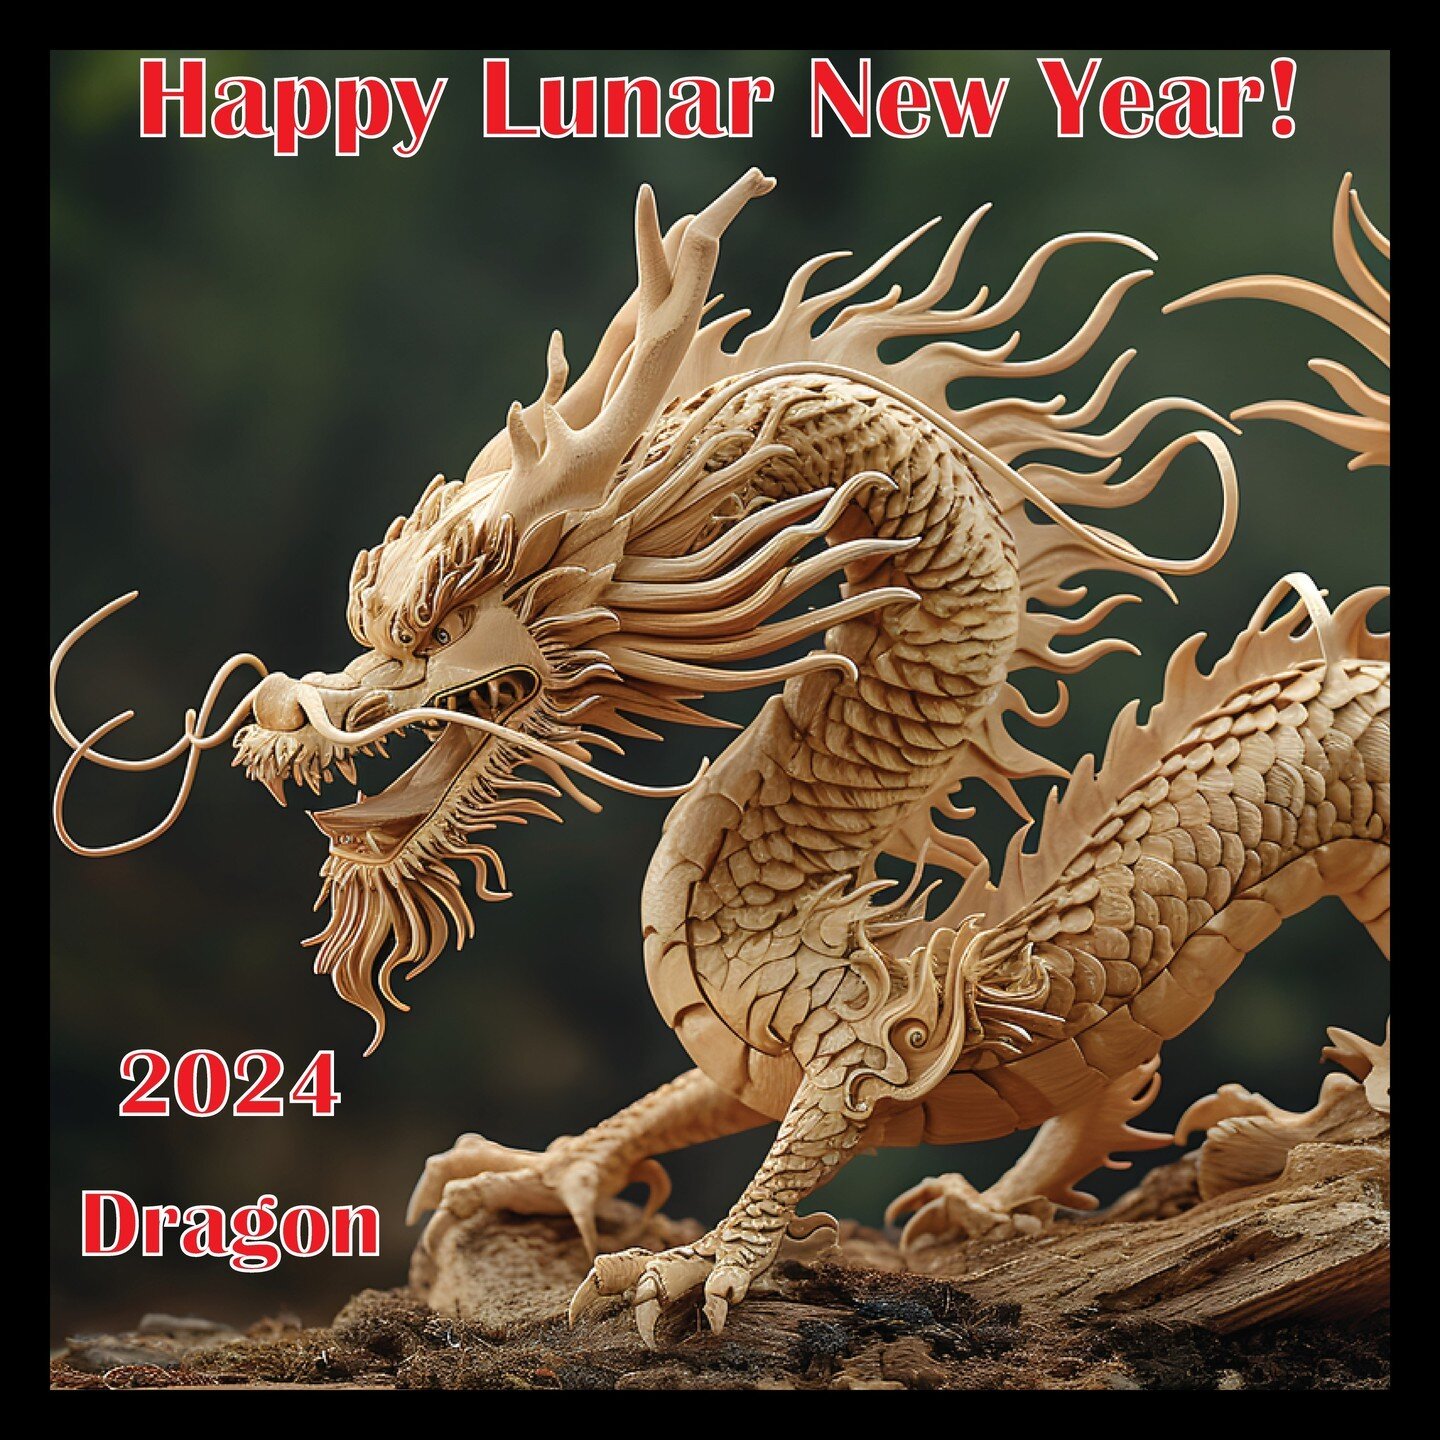 Happy Lunar New Year for 2024! Today, the Year of the Rabbit transforms into the Year of the Dragon. The only animal of the 12 in the zodiac that is imaginary, the dragon makes up for this by being bold, confident, focused and driven. Things will hap